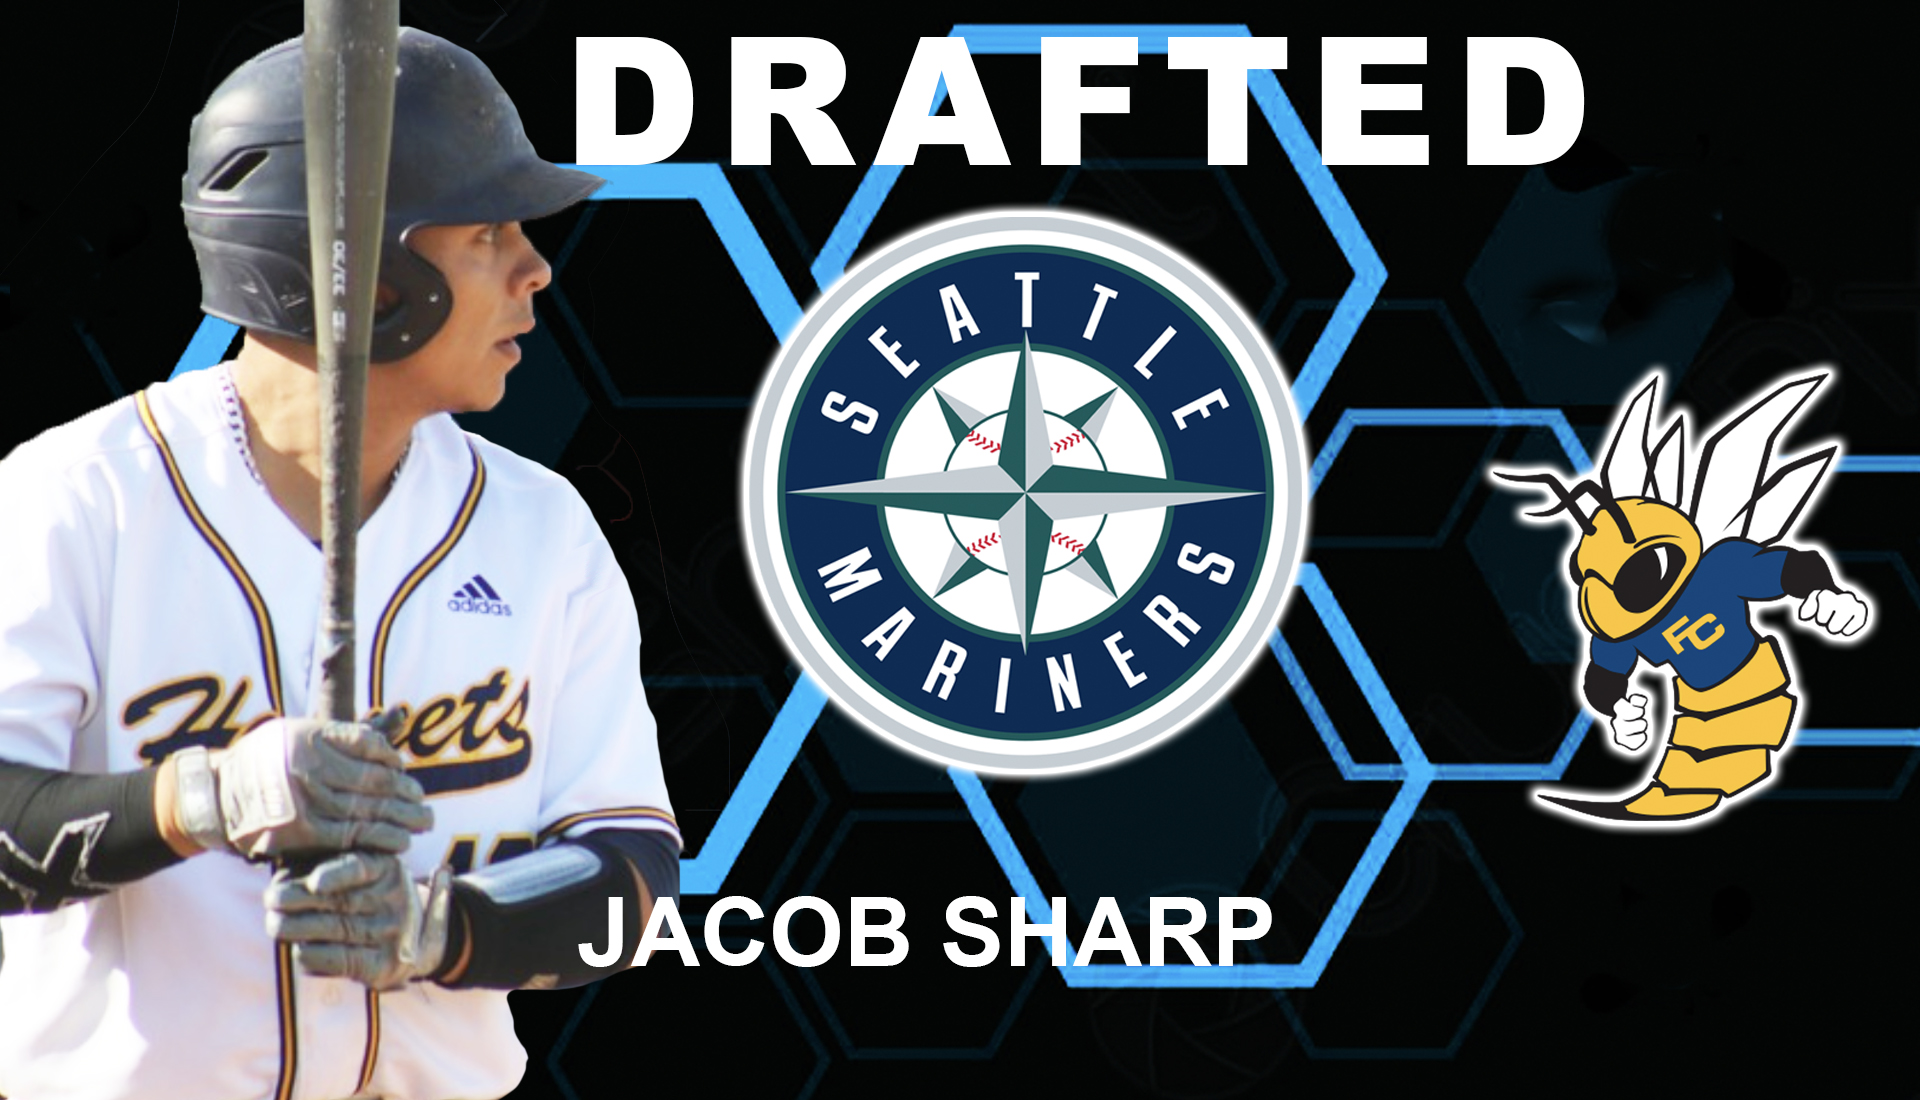 SHARP DRAFTED BY THE MLB SEATTLE MARINERS